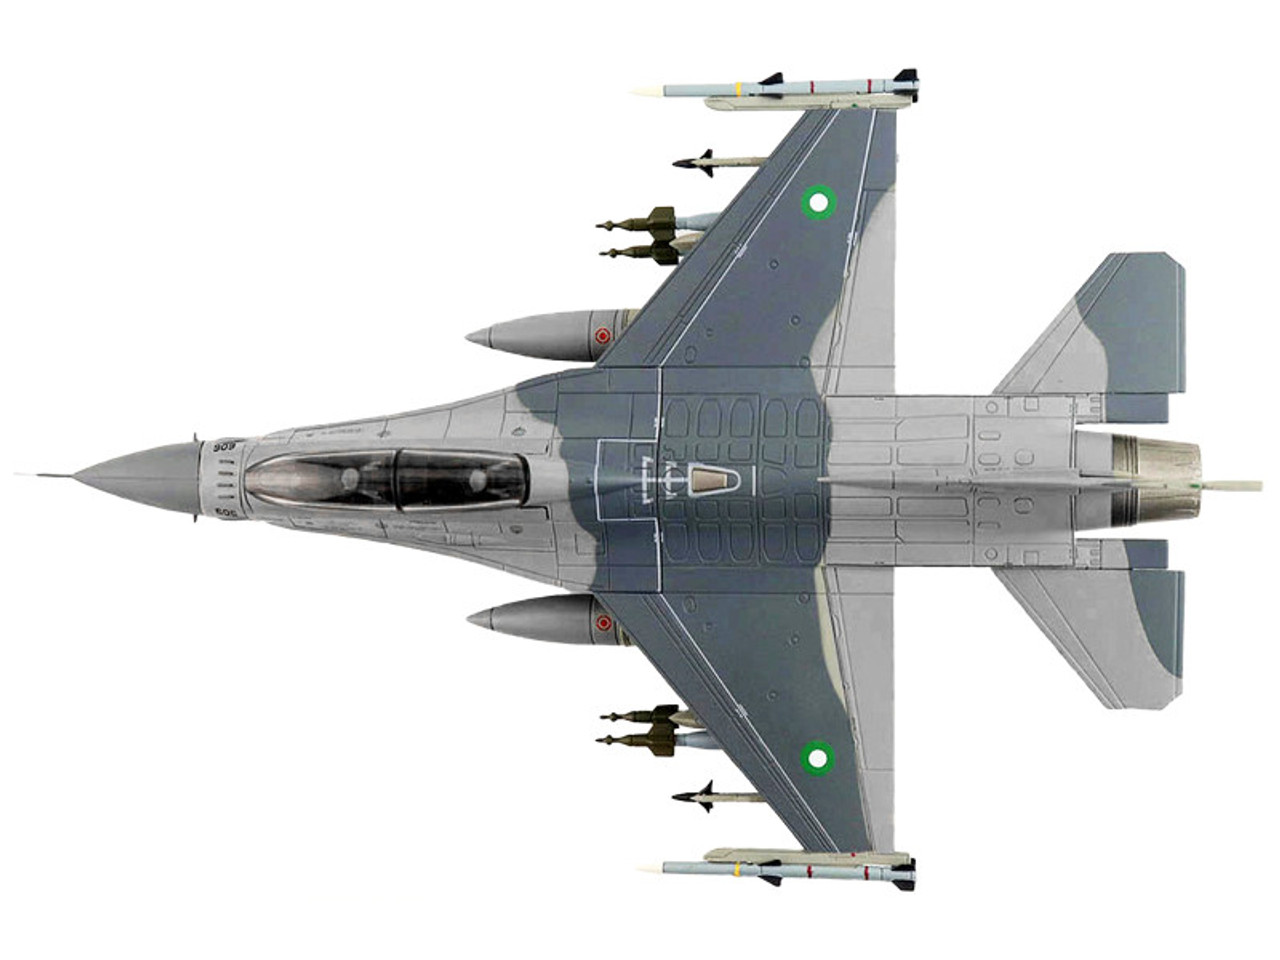 Lockheed Martin F-16BM Fighting Falcon Fighter Aircraft "84606 Su-30 Killer Pakistan Air Force" (2022) "Air Power Series" 1/72 Diecast Model by Hobby Master